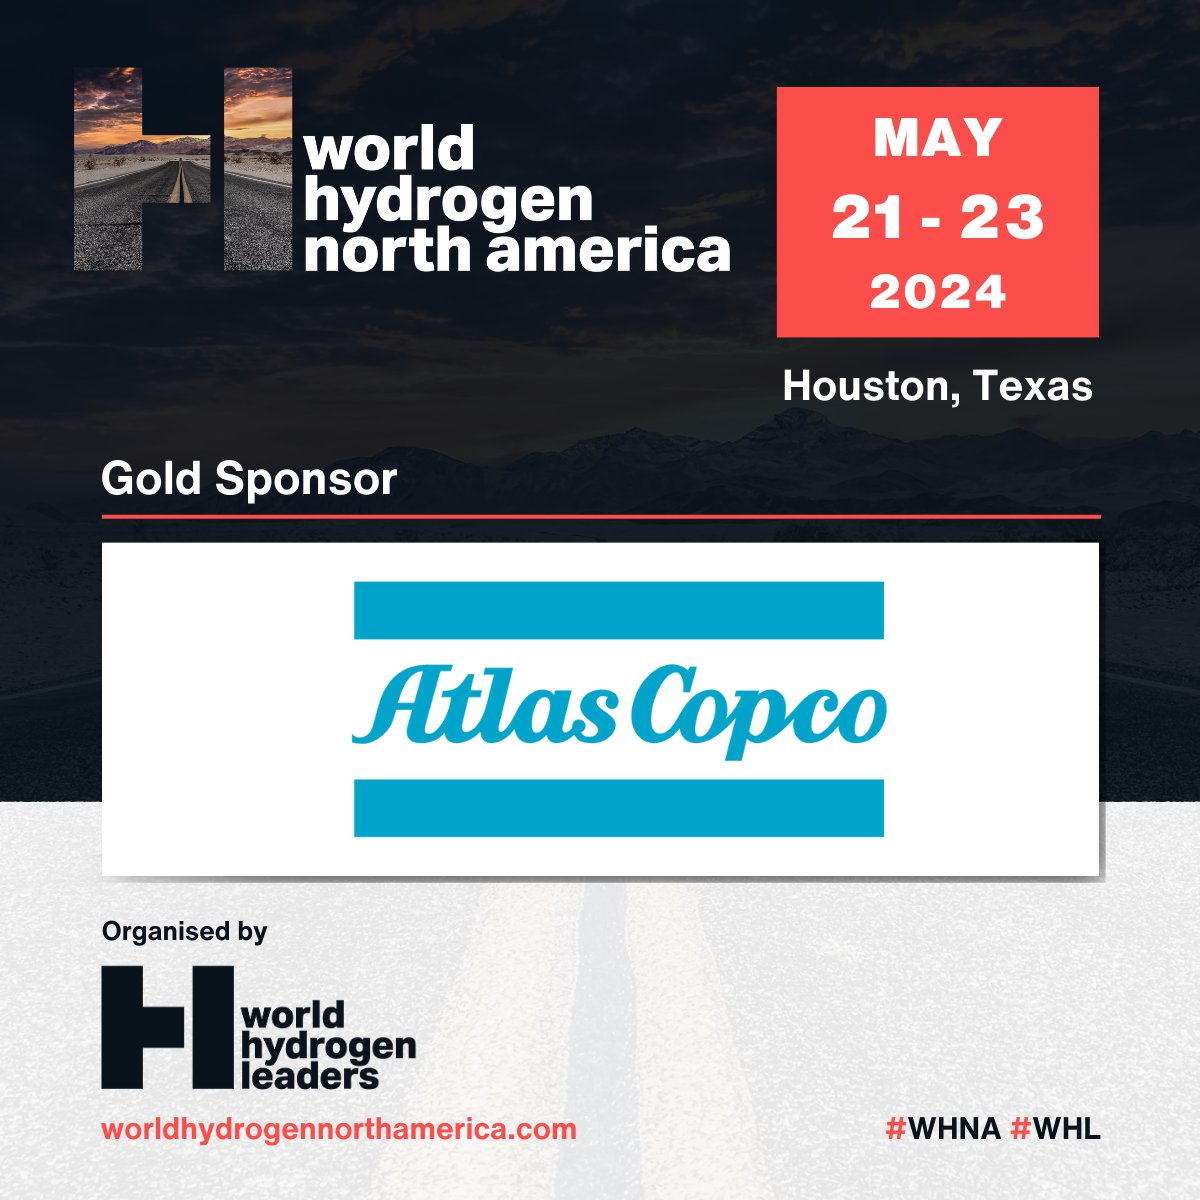 👏 We're pleased to welcome @AtlasCopcoUSA as a Gold Sponsor of #WorldHydrogenNorthAmerica, which is taking place from May 21-23 in Houston! For more information, please visit: atlascopco.com/air-usa 🎟️ Register now: worldhydrogennorthamerica.com/event/b9129970… #WHNA #WHNA24